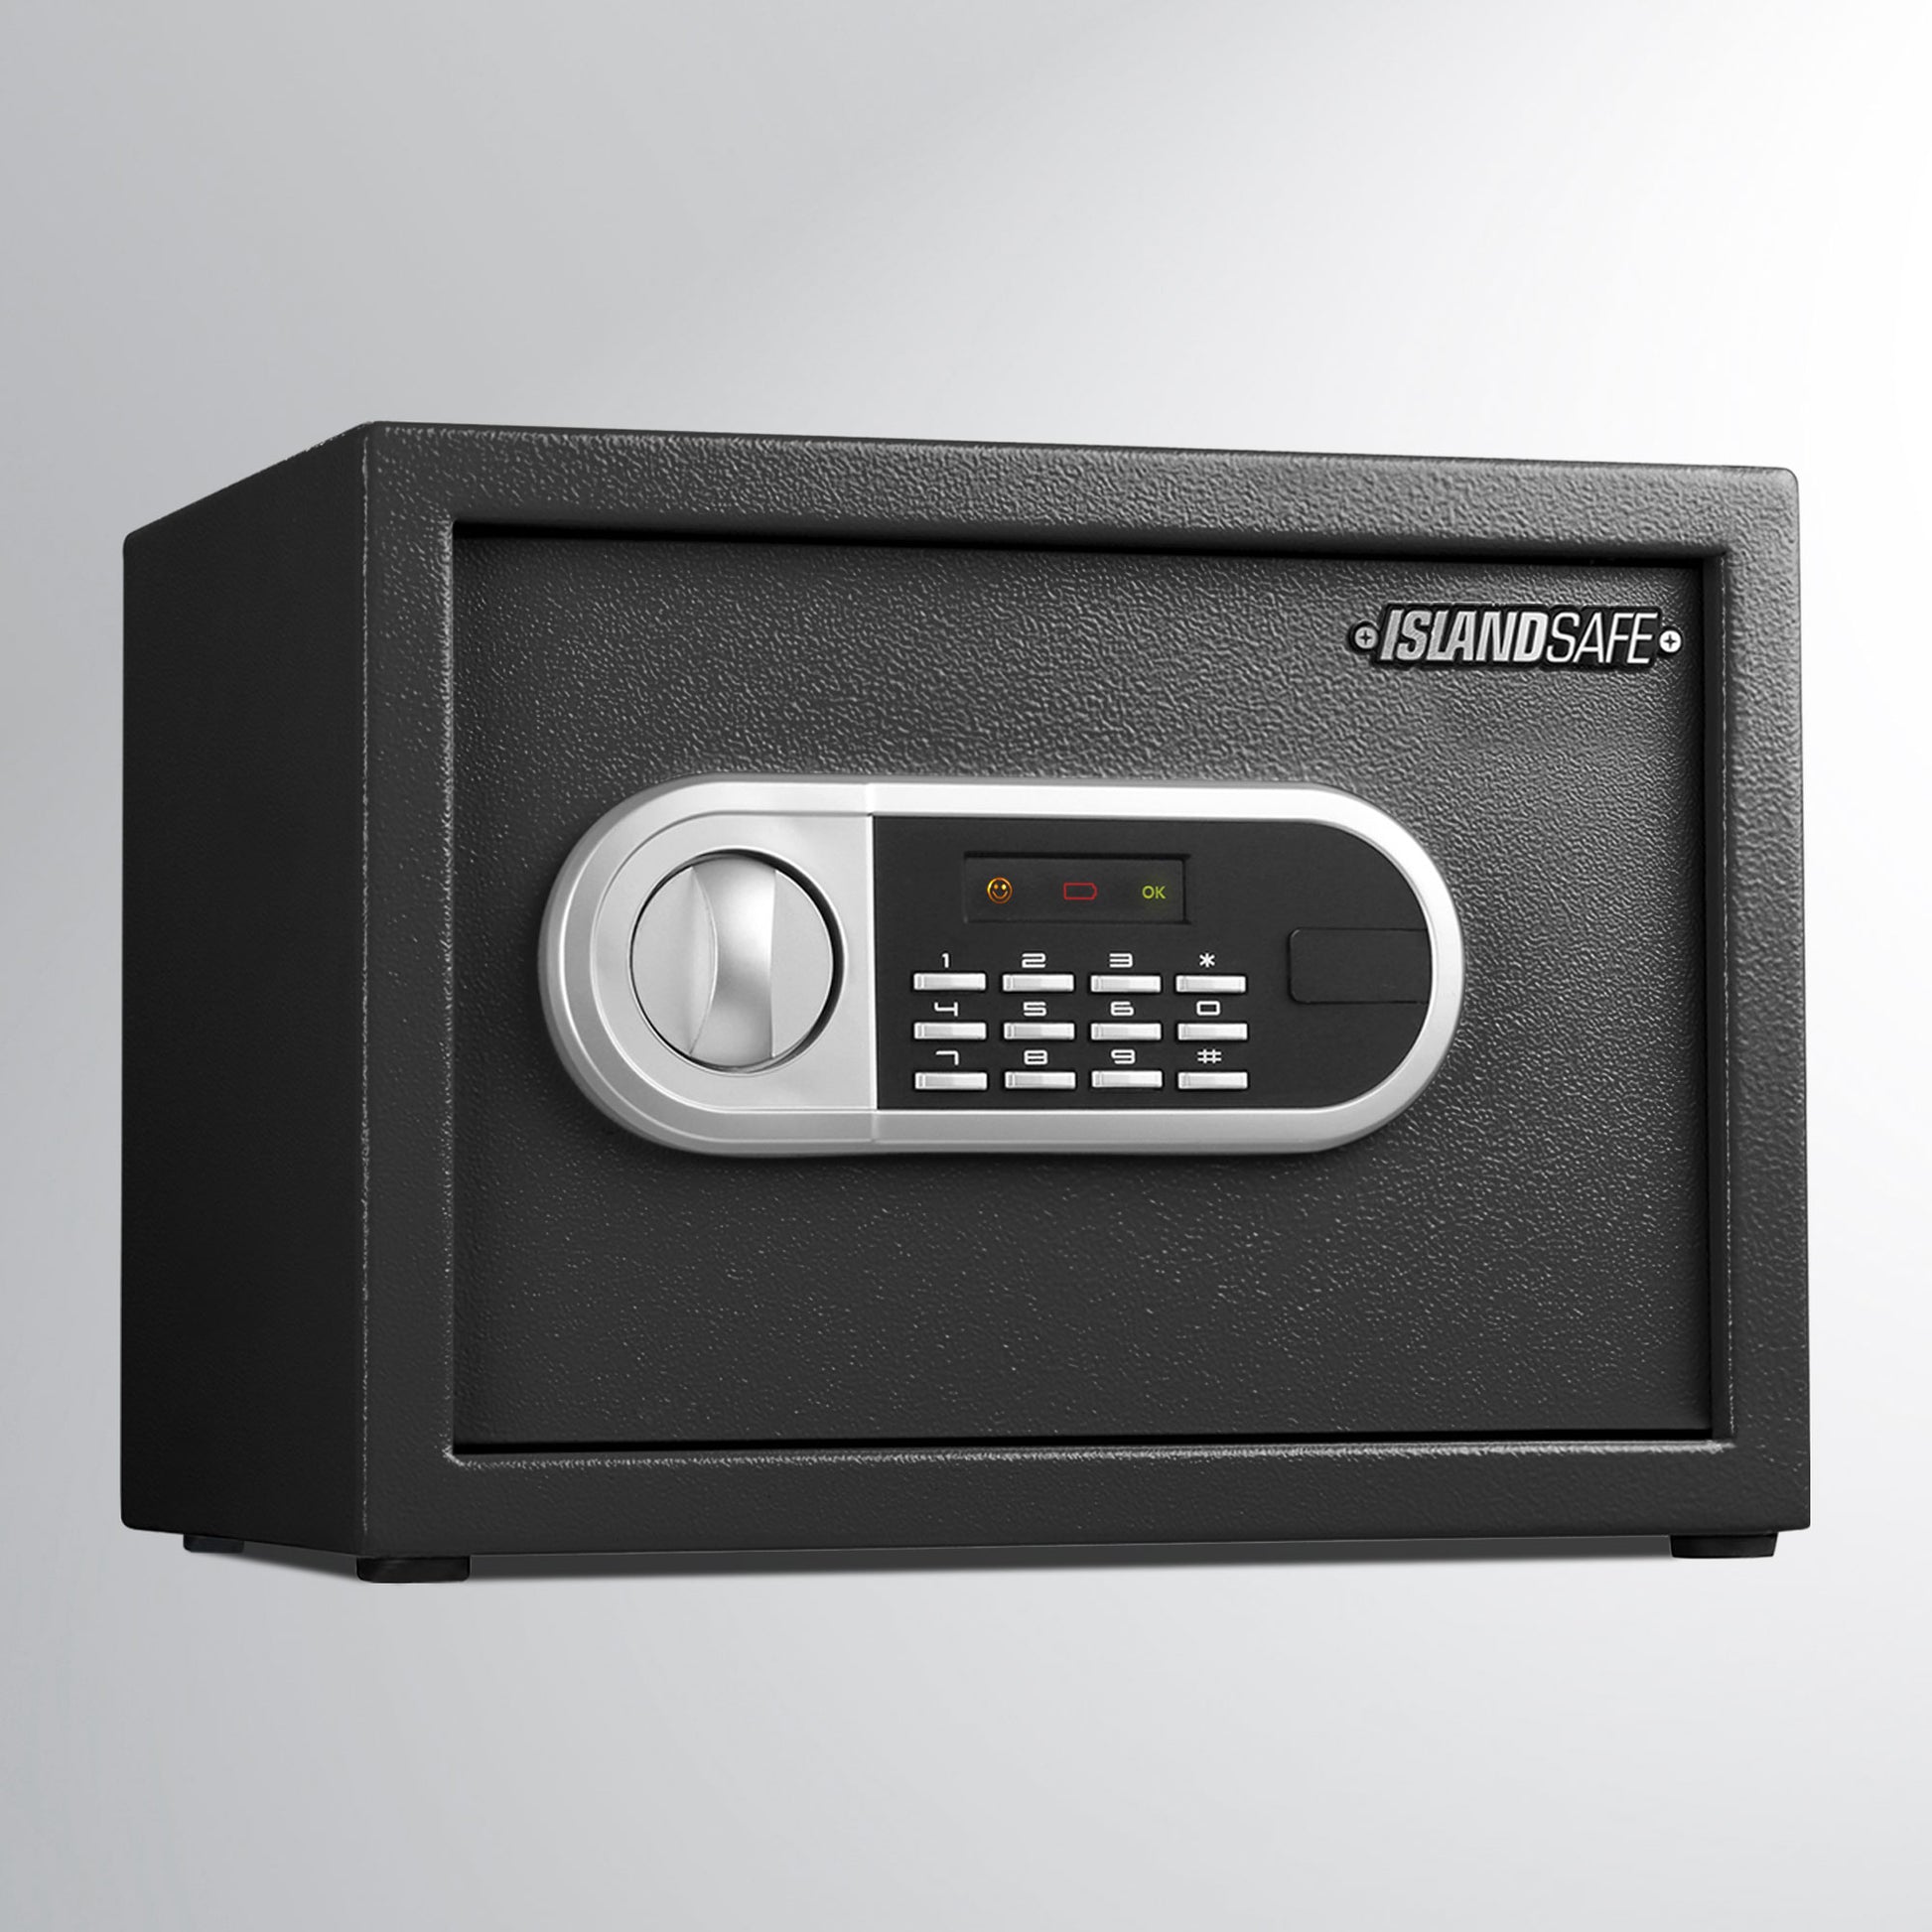 HMF security box portable with number lock fuse cable mini safe black